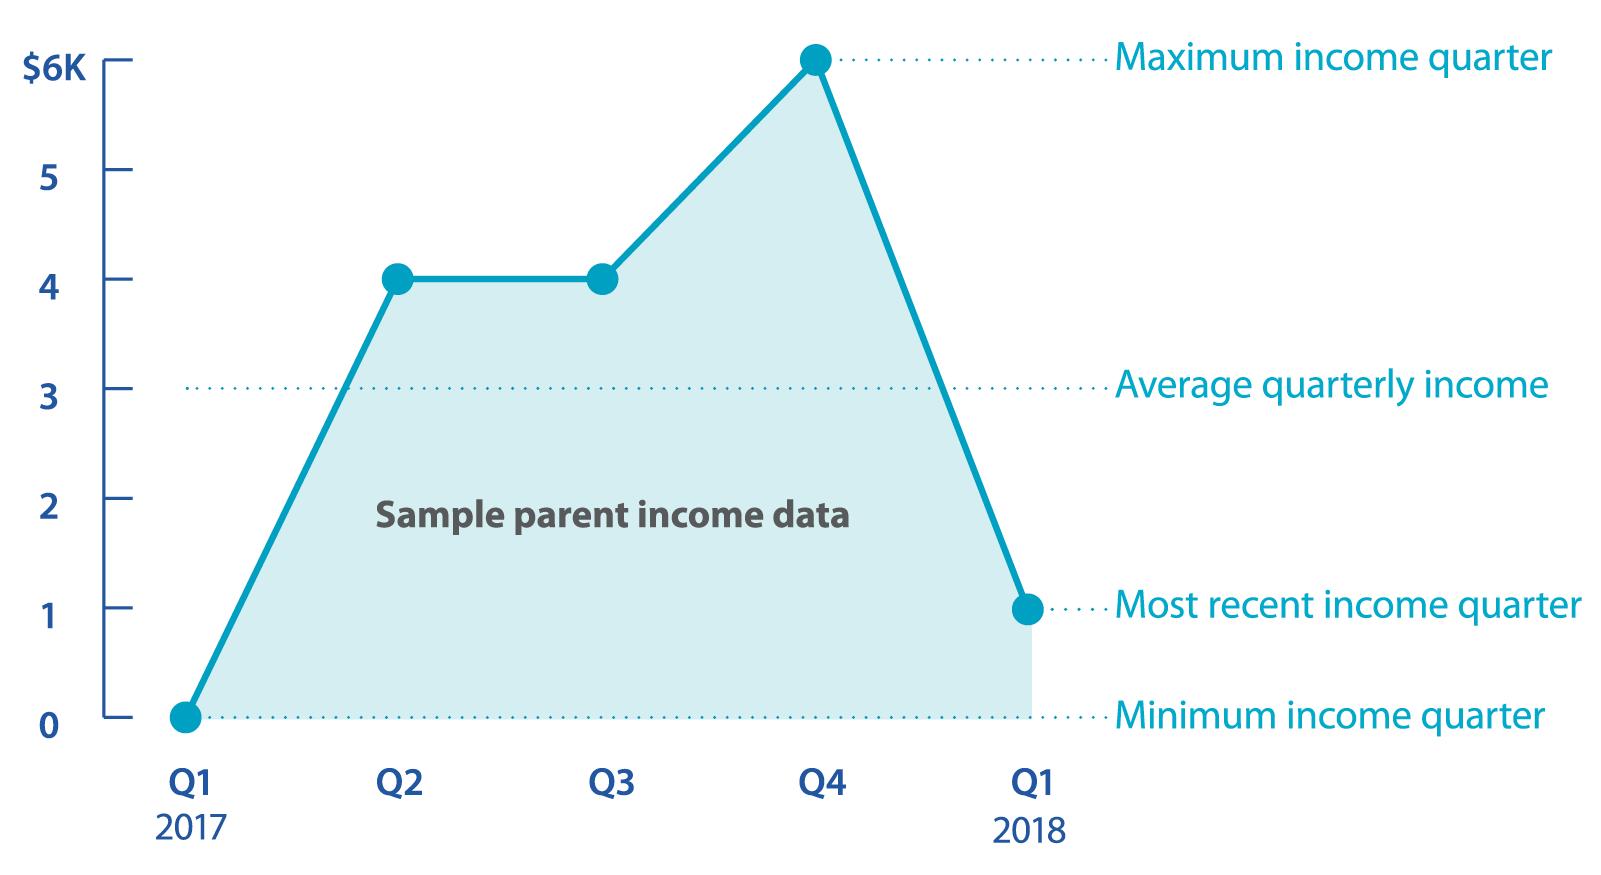 This exhibit is a line graph showing sample parent income fluctuation over five quarters. The vertical axis shows dollars, ranging from zero to 6,000. The horizontal axis displays quarters. From left to right these are "Q1 2017," "Q2 2017," “Q3 2017," "Q4 2017," and "Q1 2018." The following data points are marked on the graph: Q1 2017 and $0, Q2 2017 and $4,000, Q3 2017 and $4,000, Q4 2017 and $6,000, and Q1 2018 and $1,000. Dotted, horizontal lines leading from the vertical axis to the right of the graph indicate different calculations to set an order amount. The minimum income quarter is $0; the most recent income quarter is $1,000; the average quarterly income is $3,000; and the maximum income quarter is $6,000.